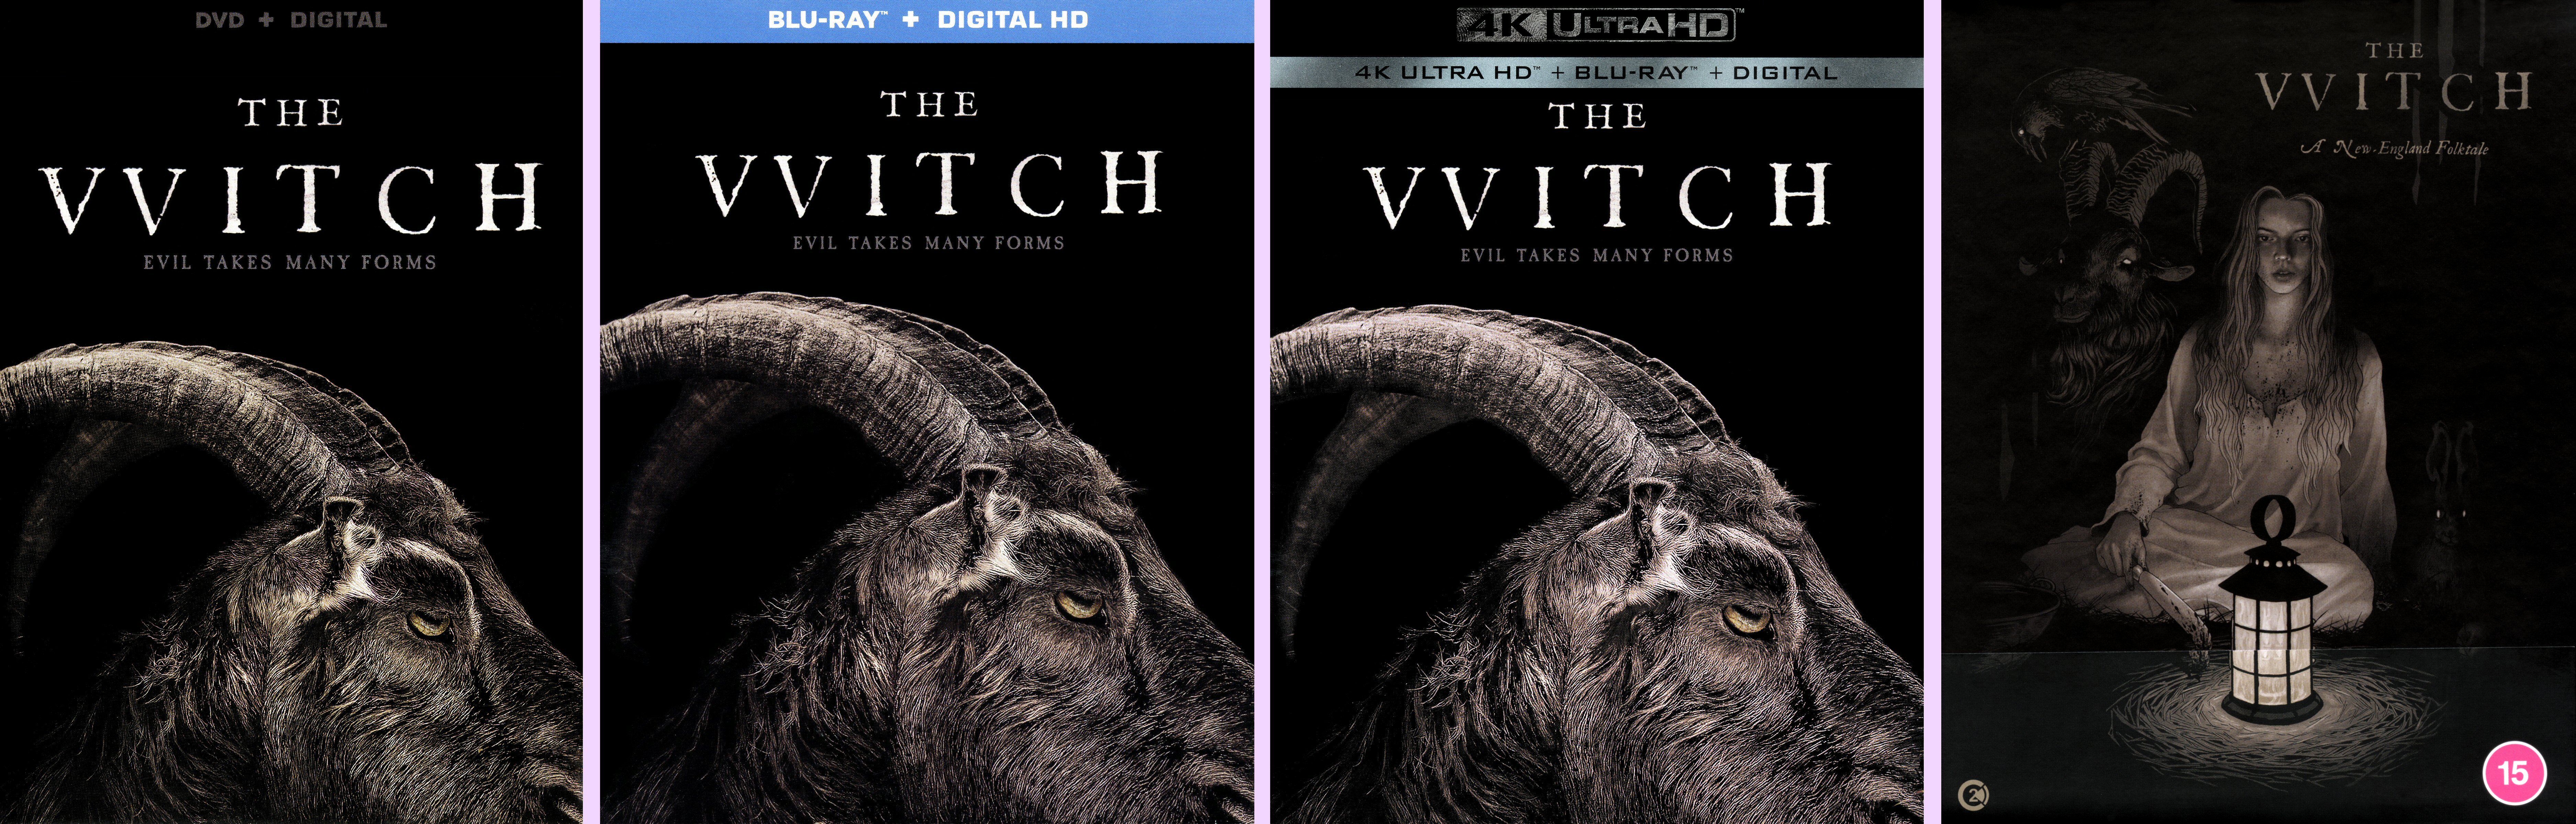 DVD Exotica: A Second Look At the VVitch